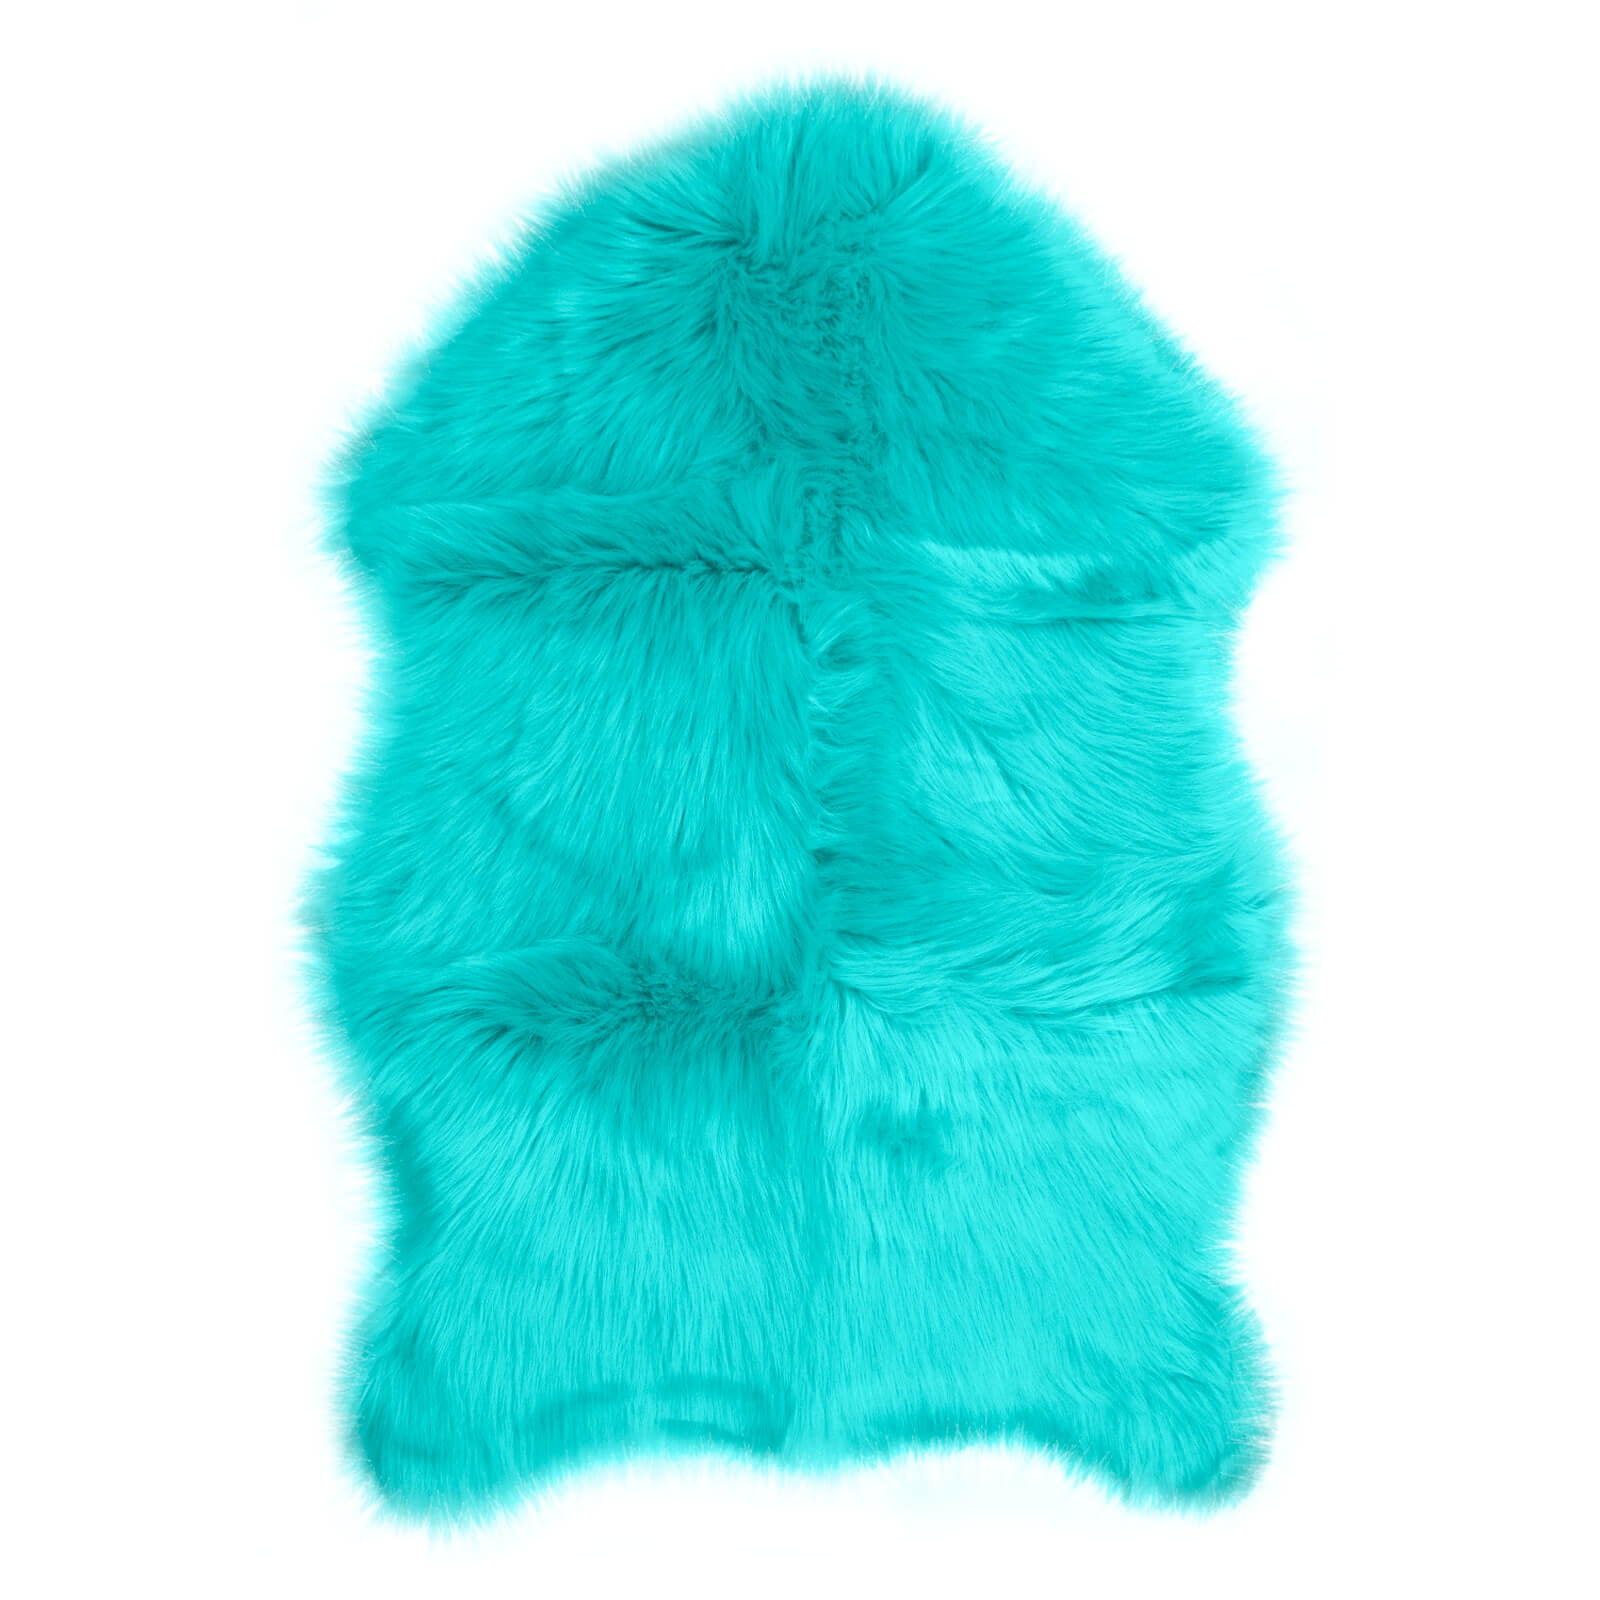 Faux Fur Sheepskin Rug – Teal, Furry Rugs for Vanity Seats Chairs Cover ...